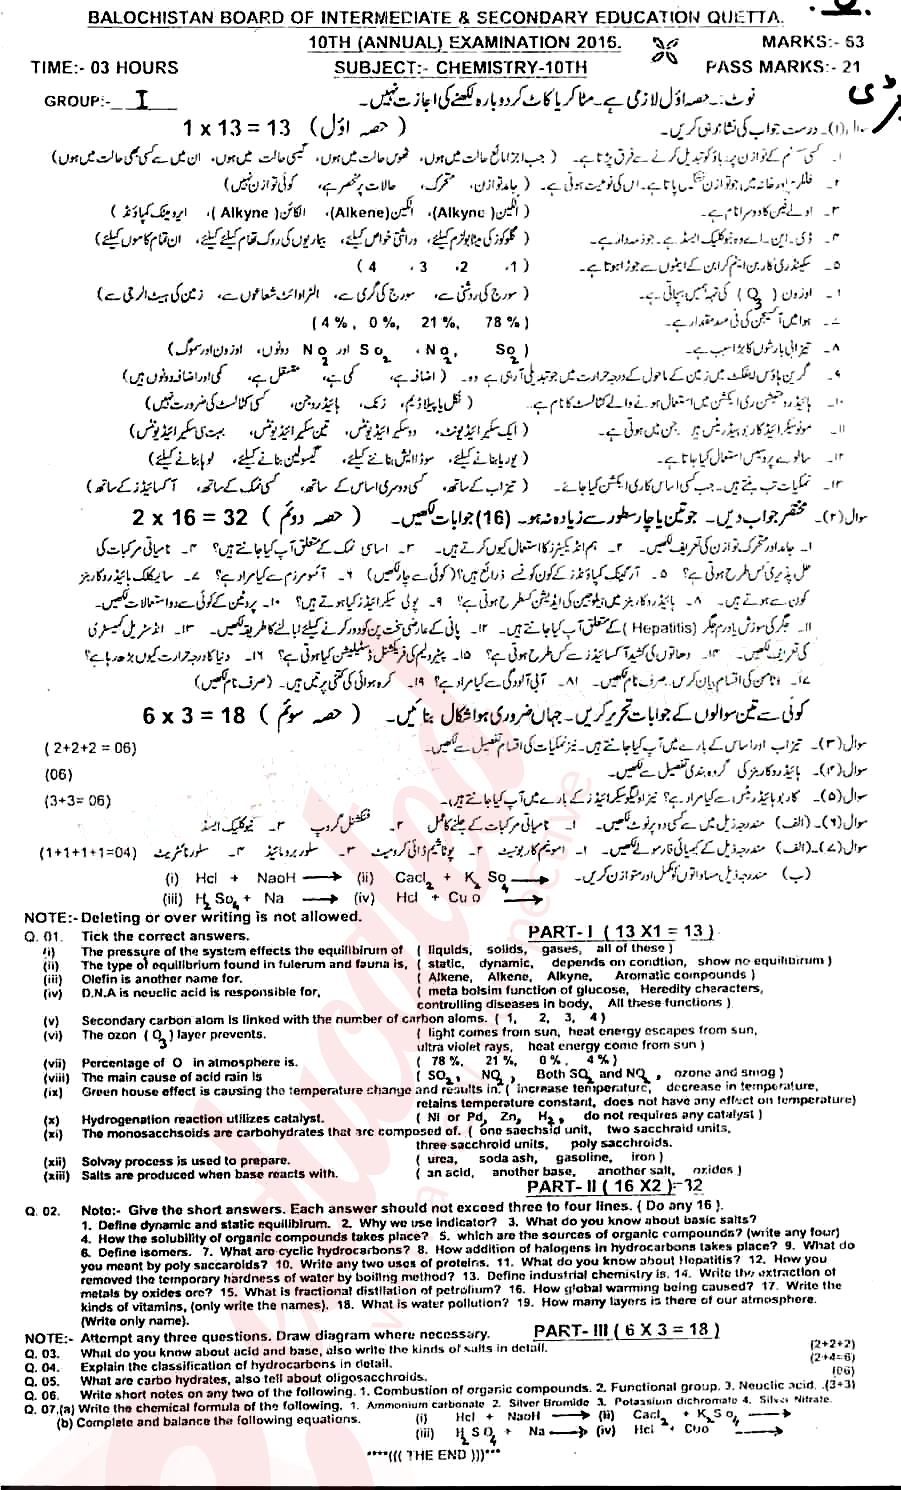 Chemistry 10th class Past Paper Group 1 BISE Quetta 2016